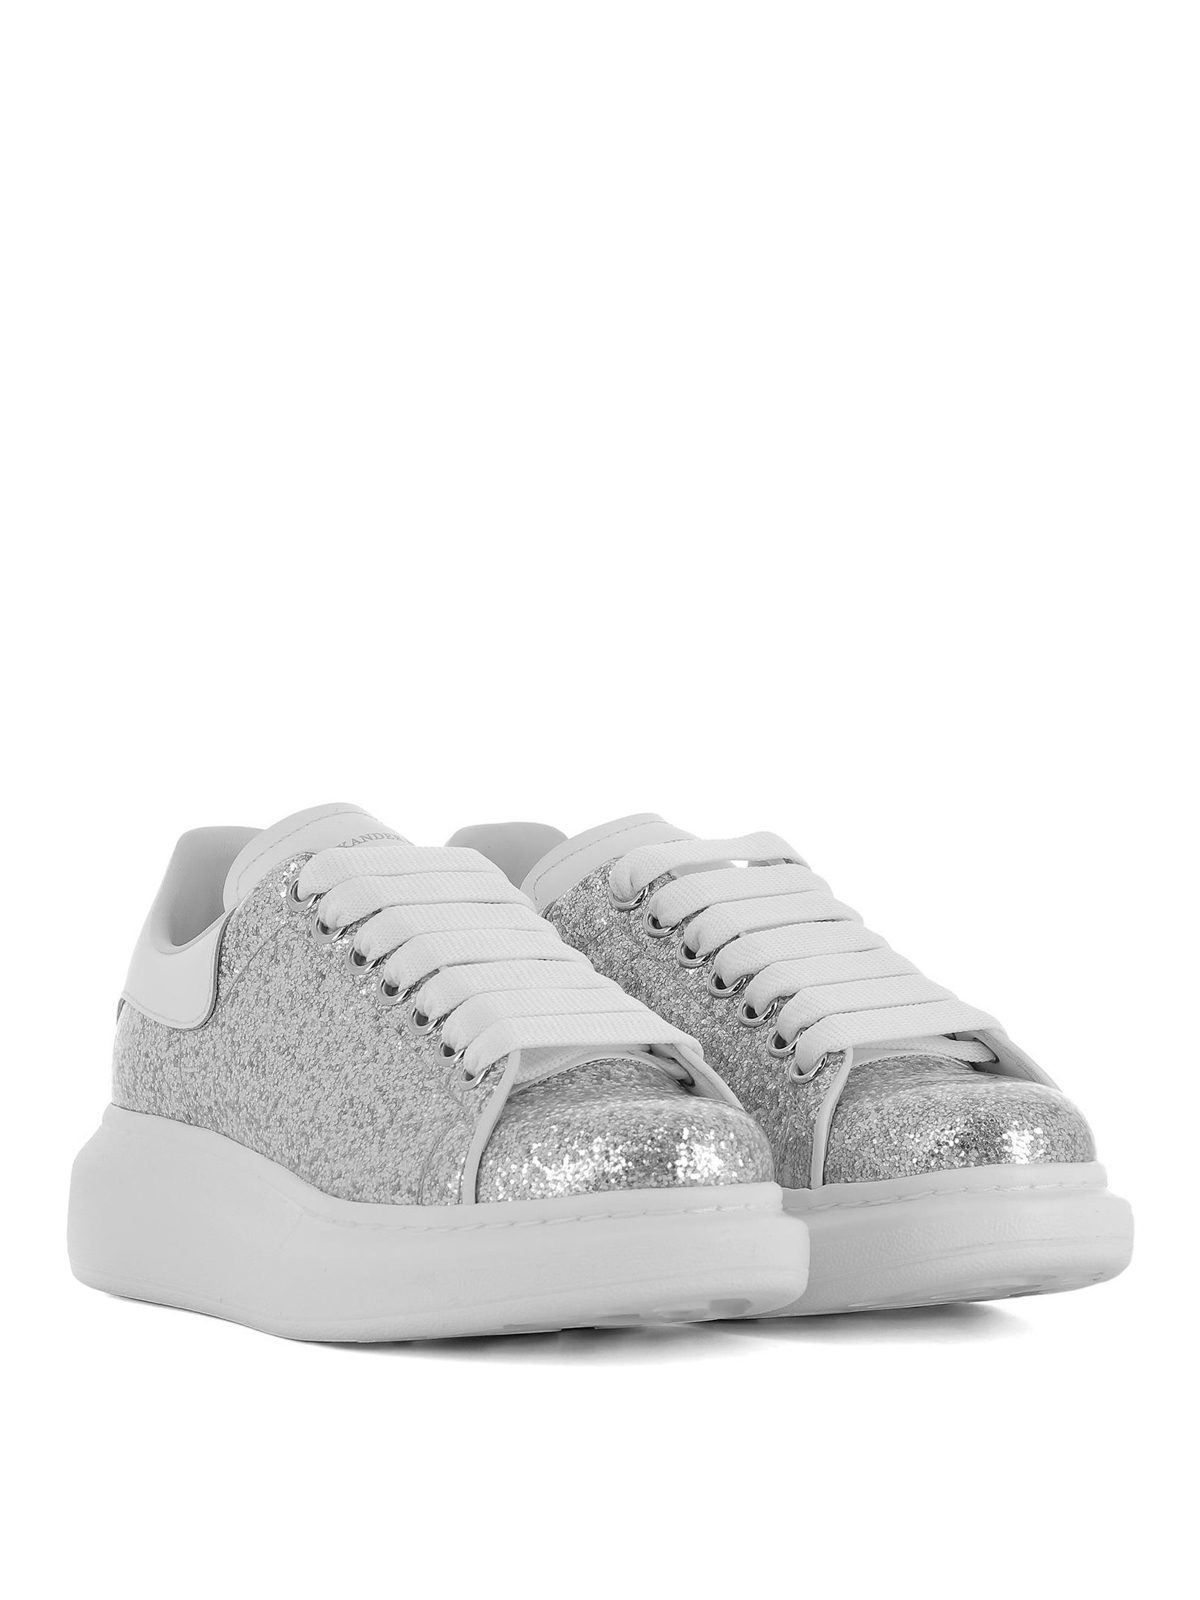 Alexander McQueen Oversized White And Silver Glitter Sneakers New